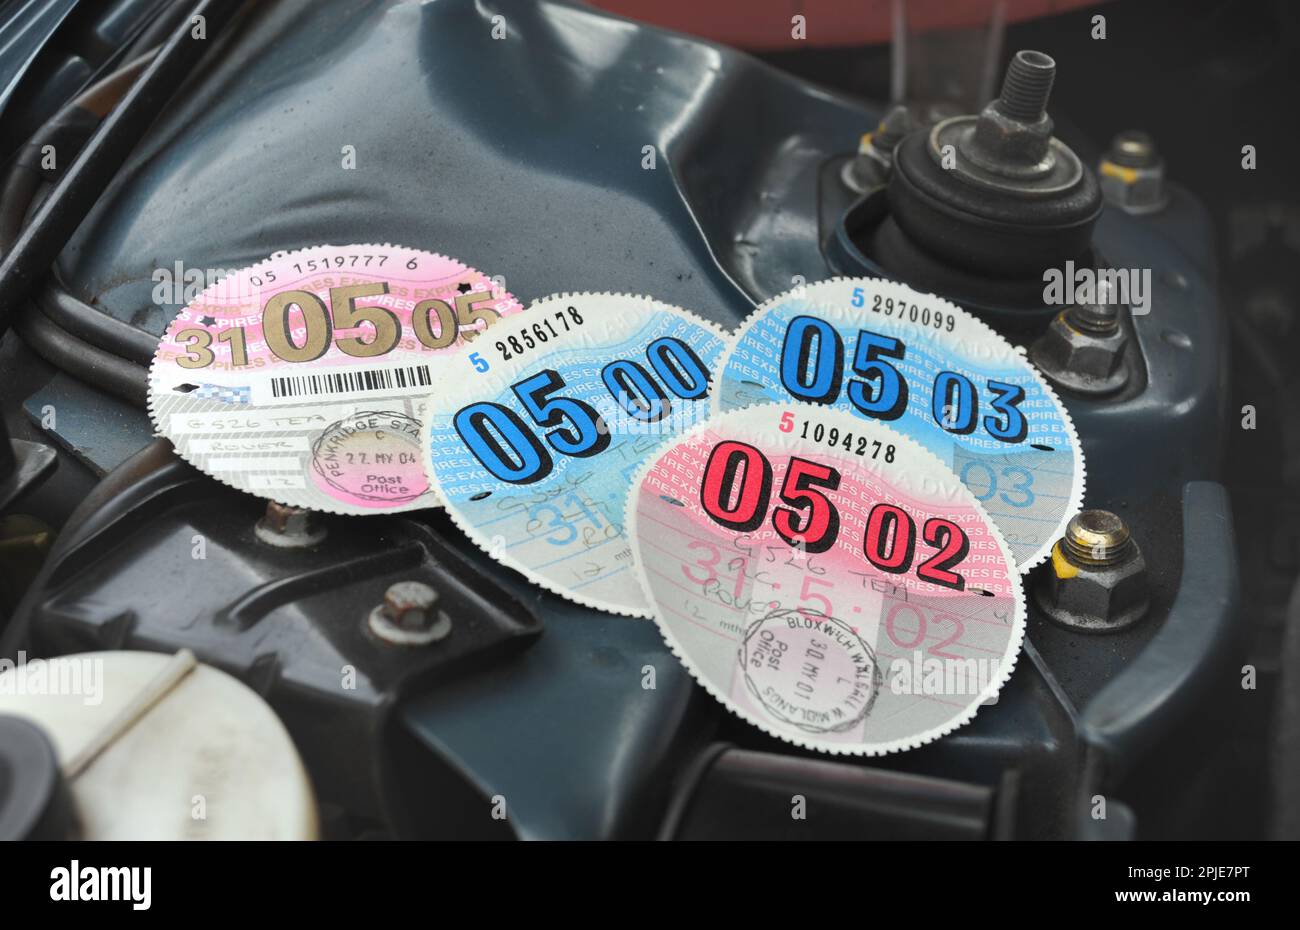 CAR TAX DISCS IN CAR ENGINE BAY RE VED VEHICLE EXCISE DUTY ROAD TAX MOTORING COSTS ETC UK Stock Photo